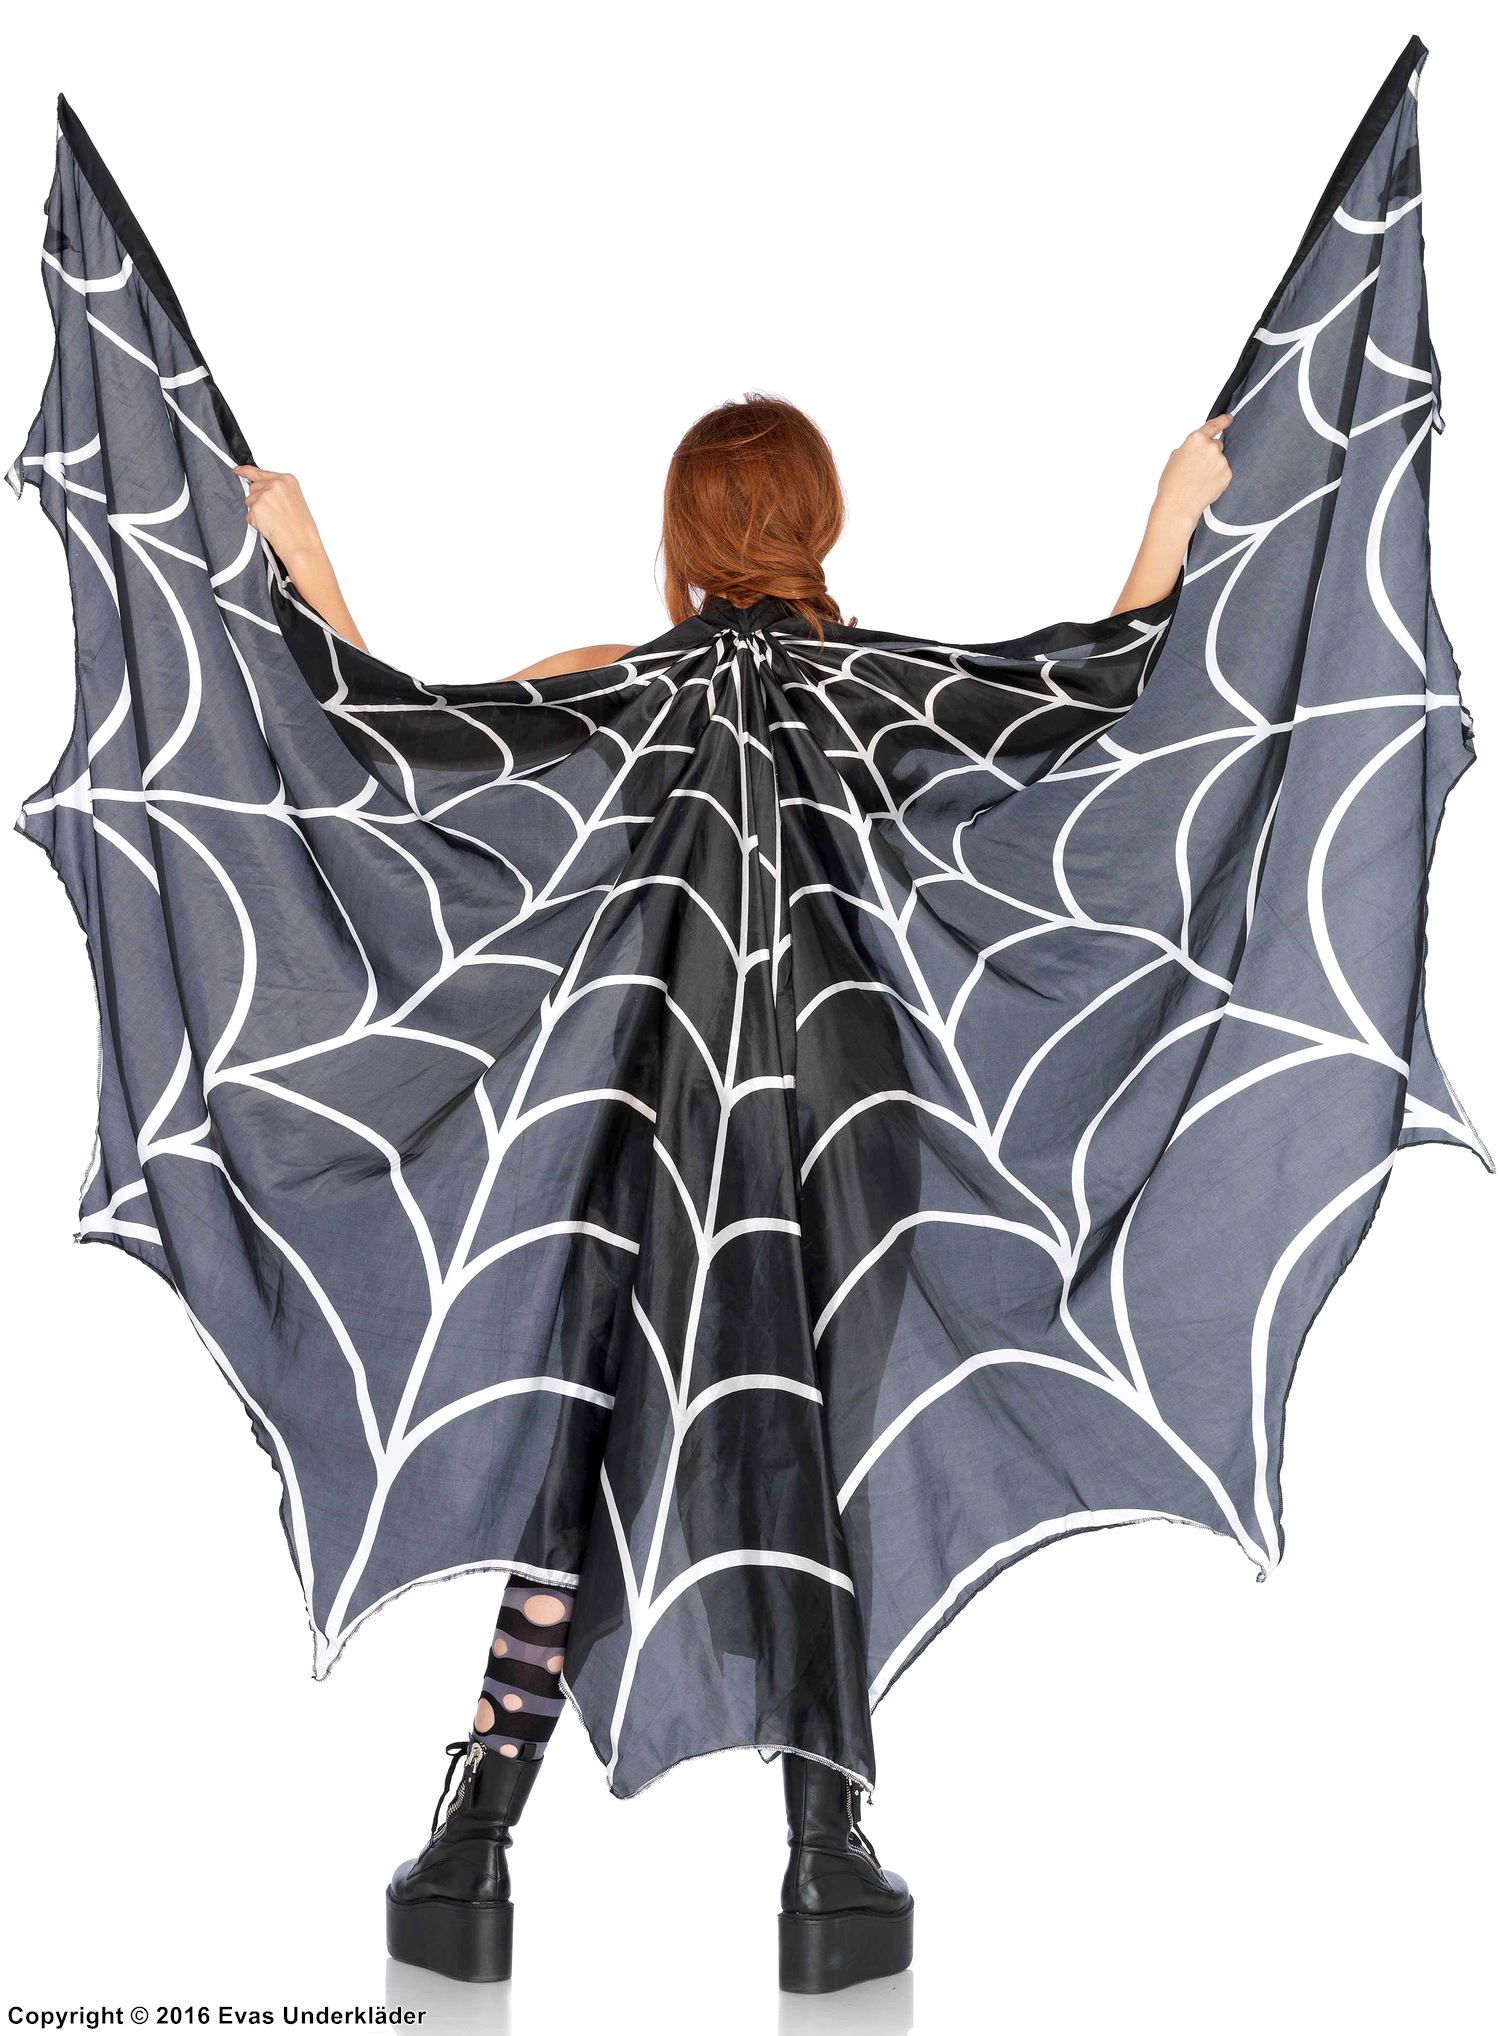 Costume wings, spider web